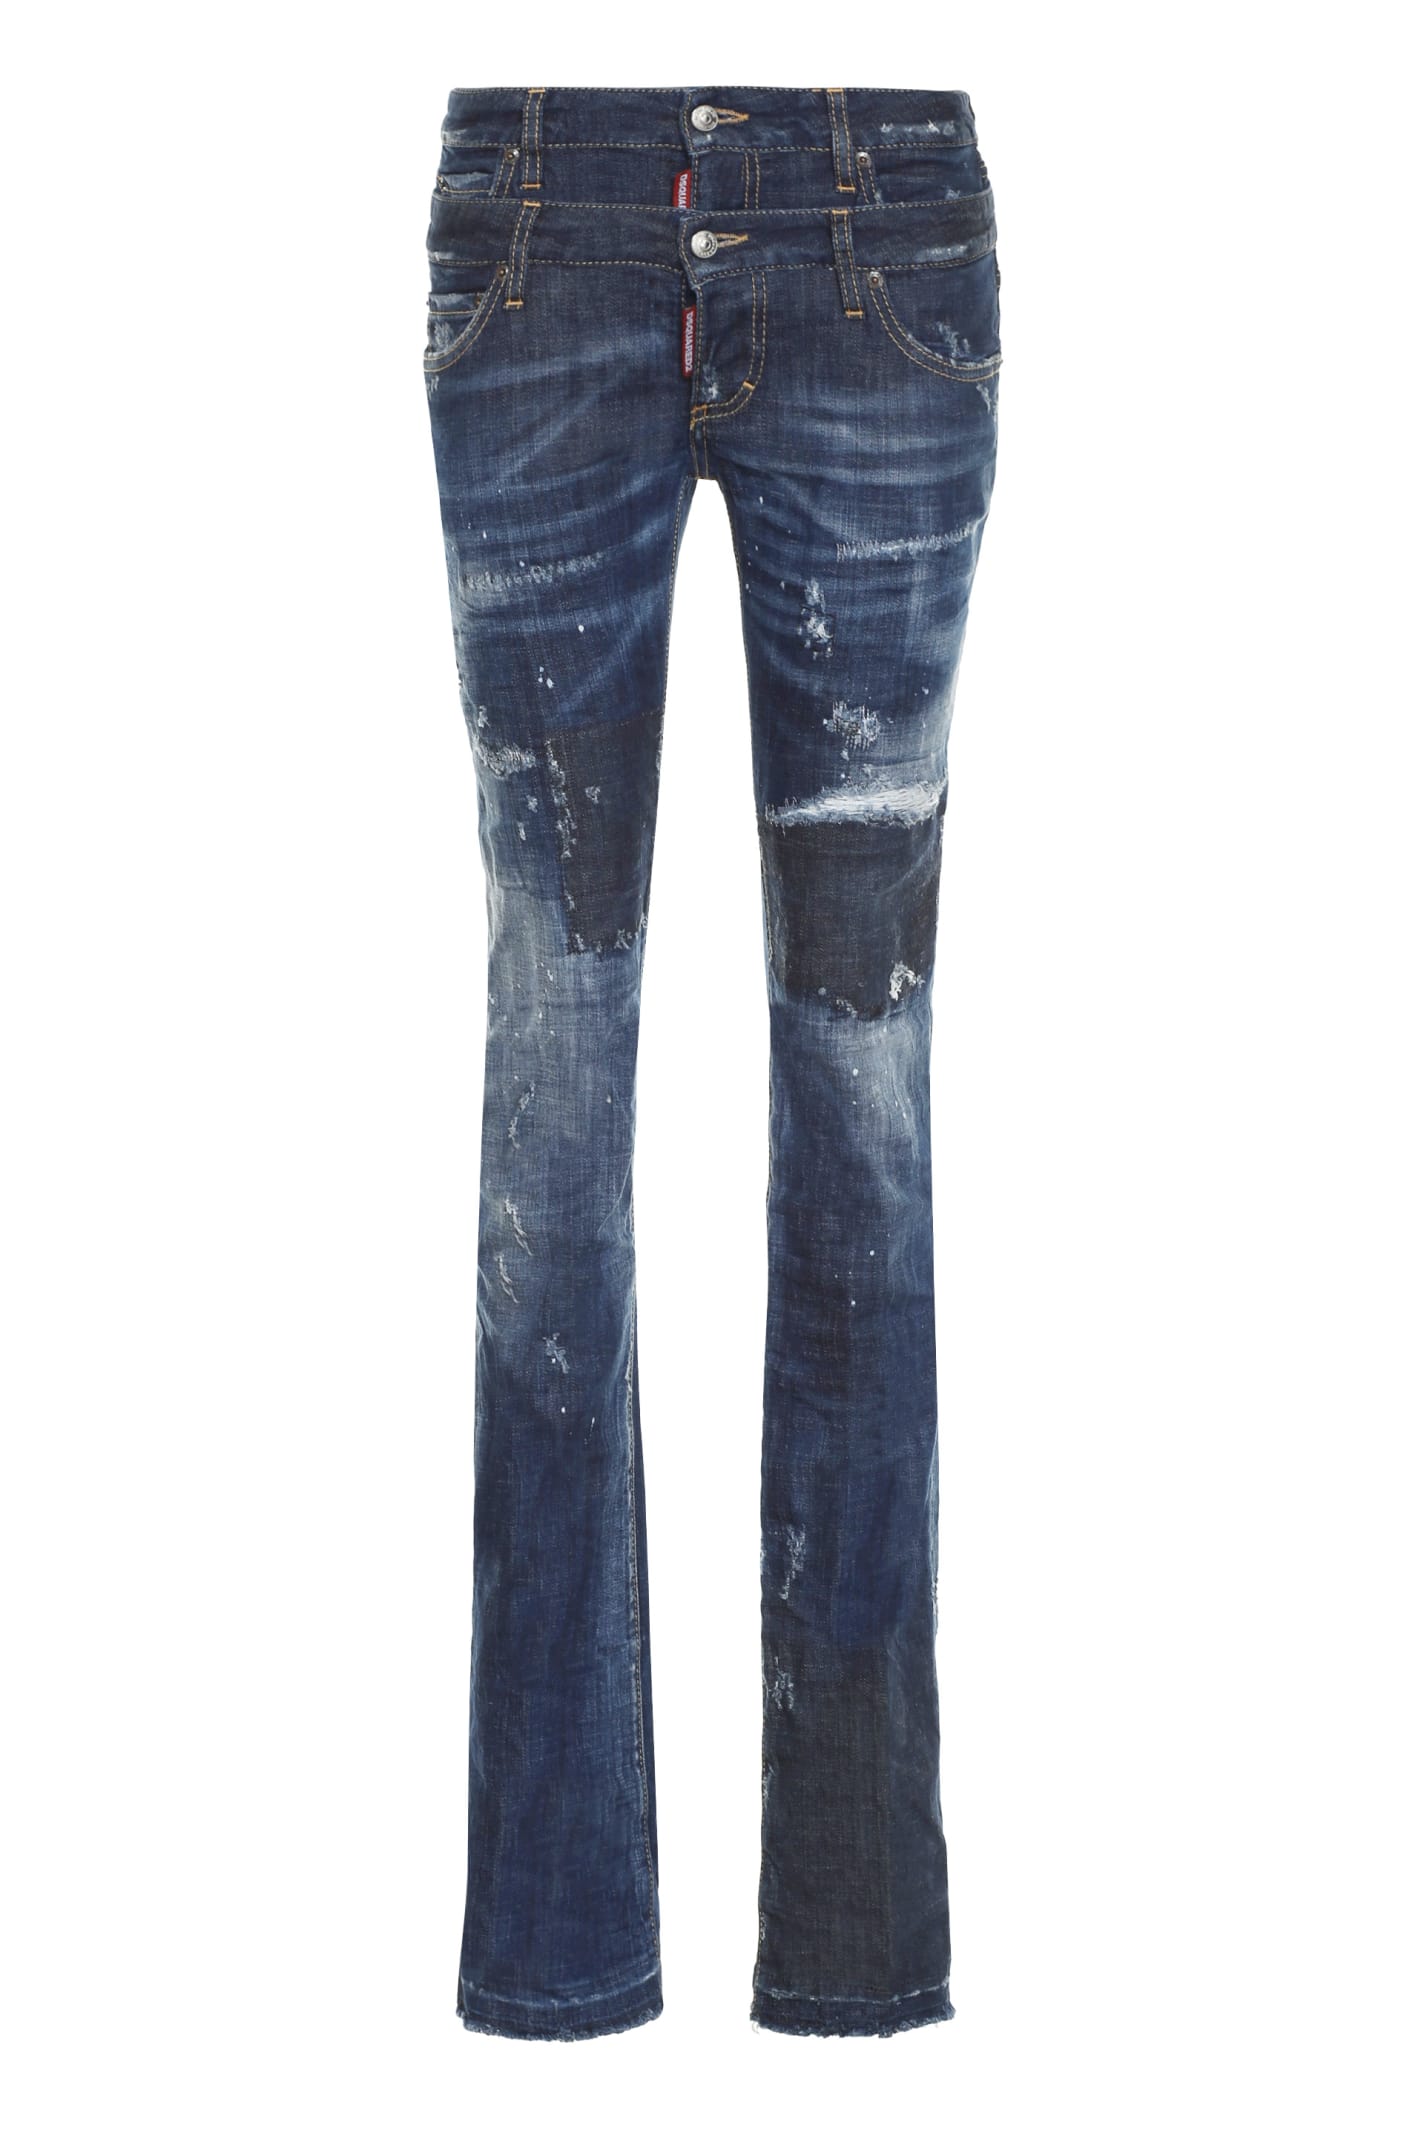 Dsquared2 Worn-out Details Jeans